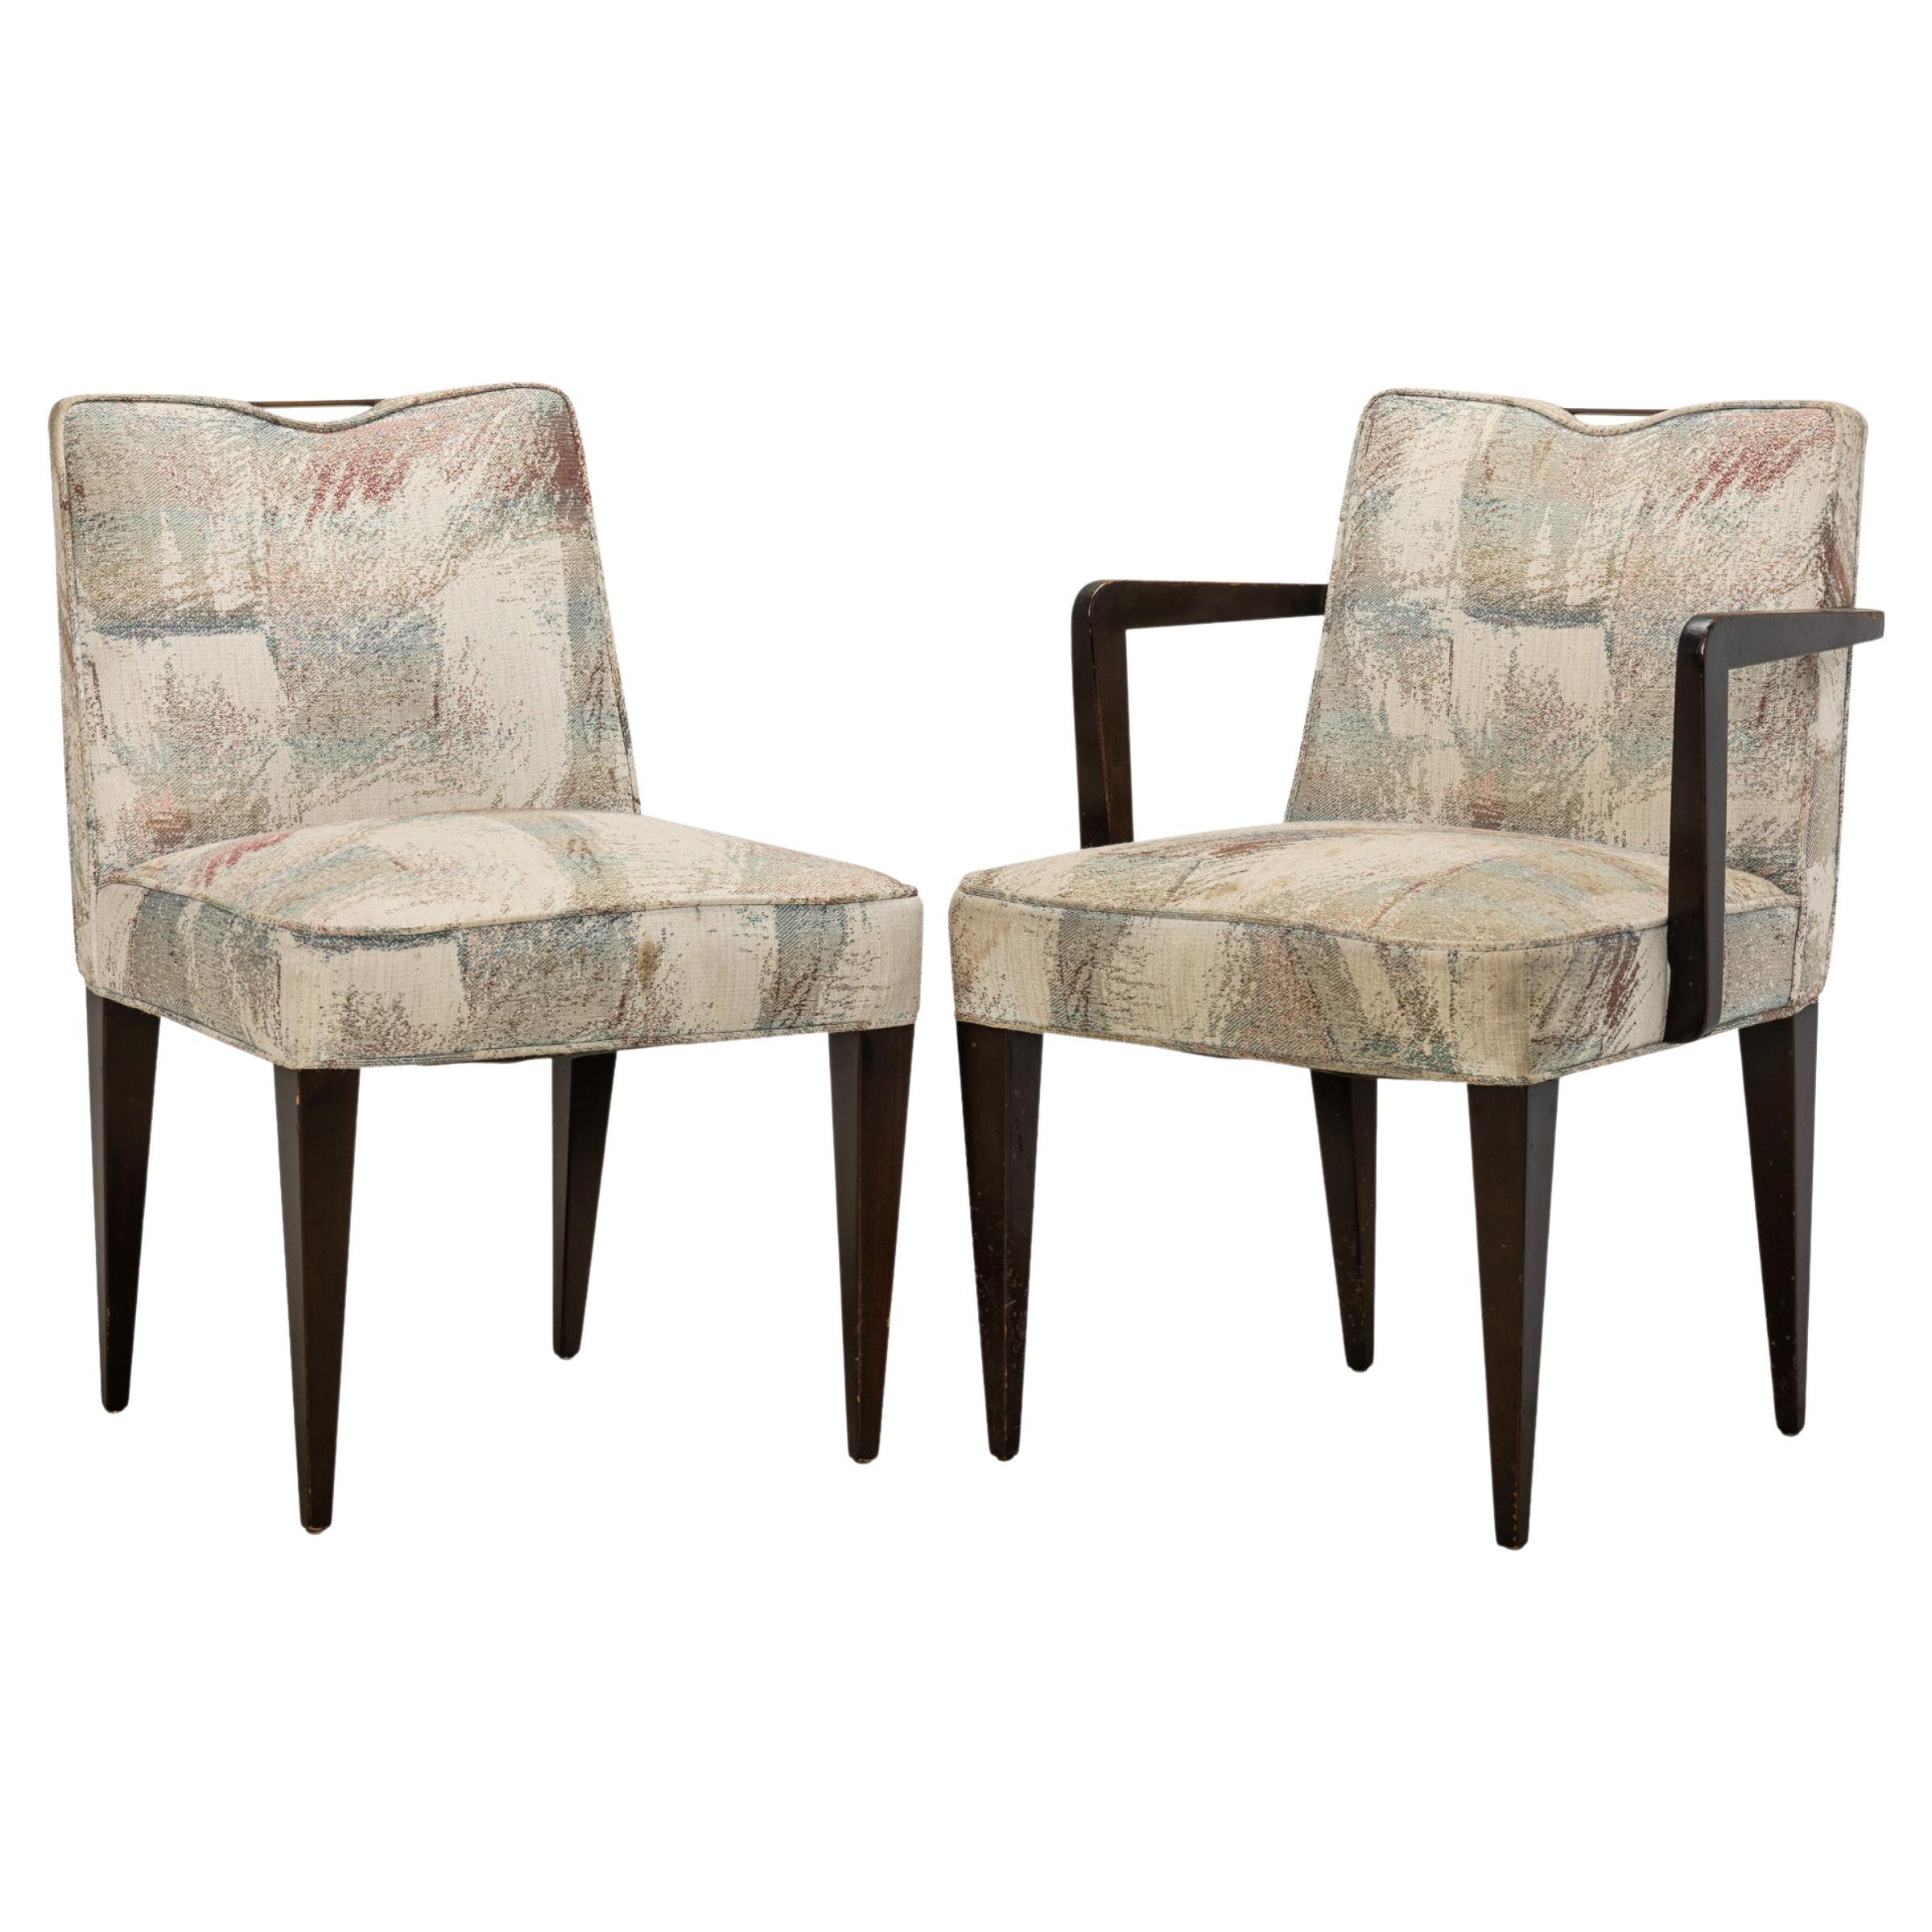 Set of 6 Edward Wormley for Dunbar Patterned Pastel Upholstered Dining Chairs For Sale